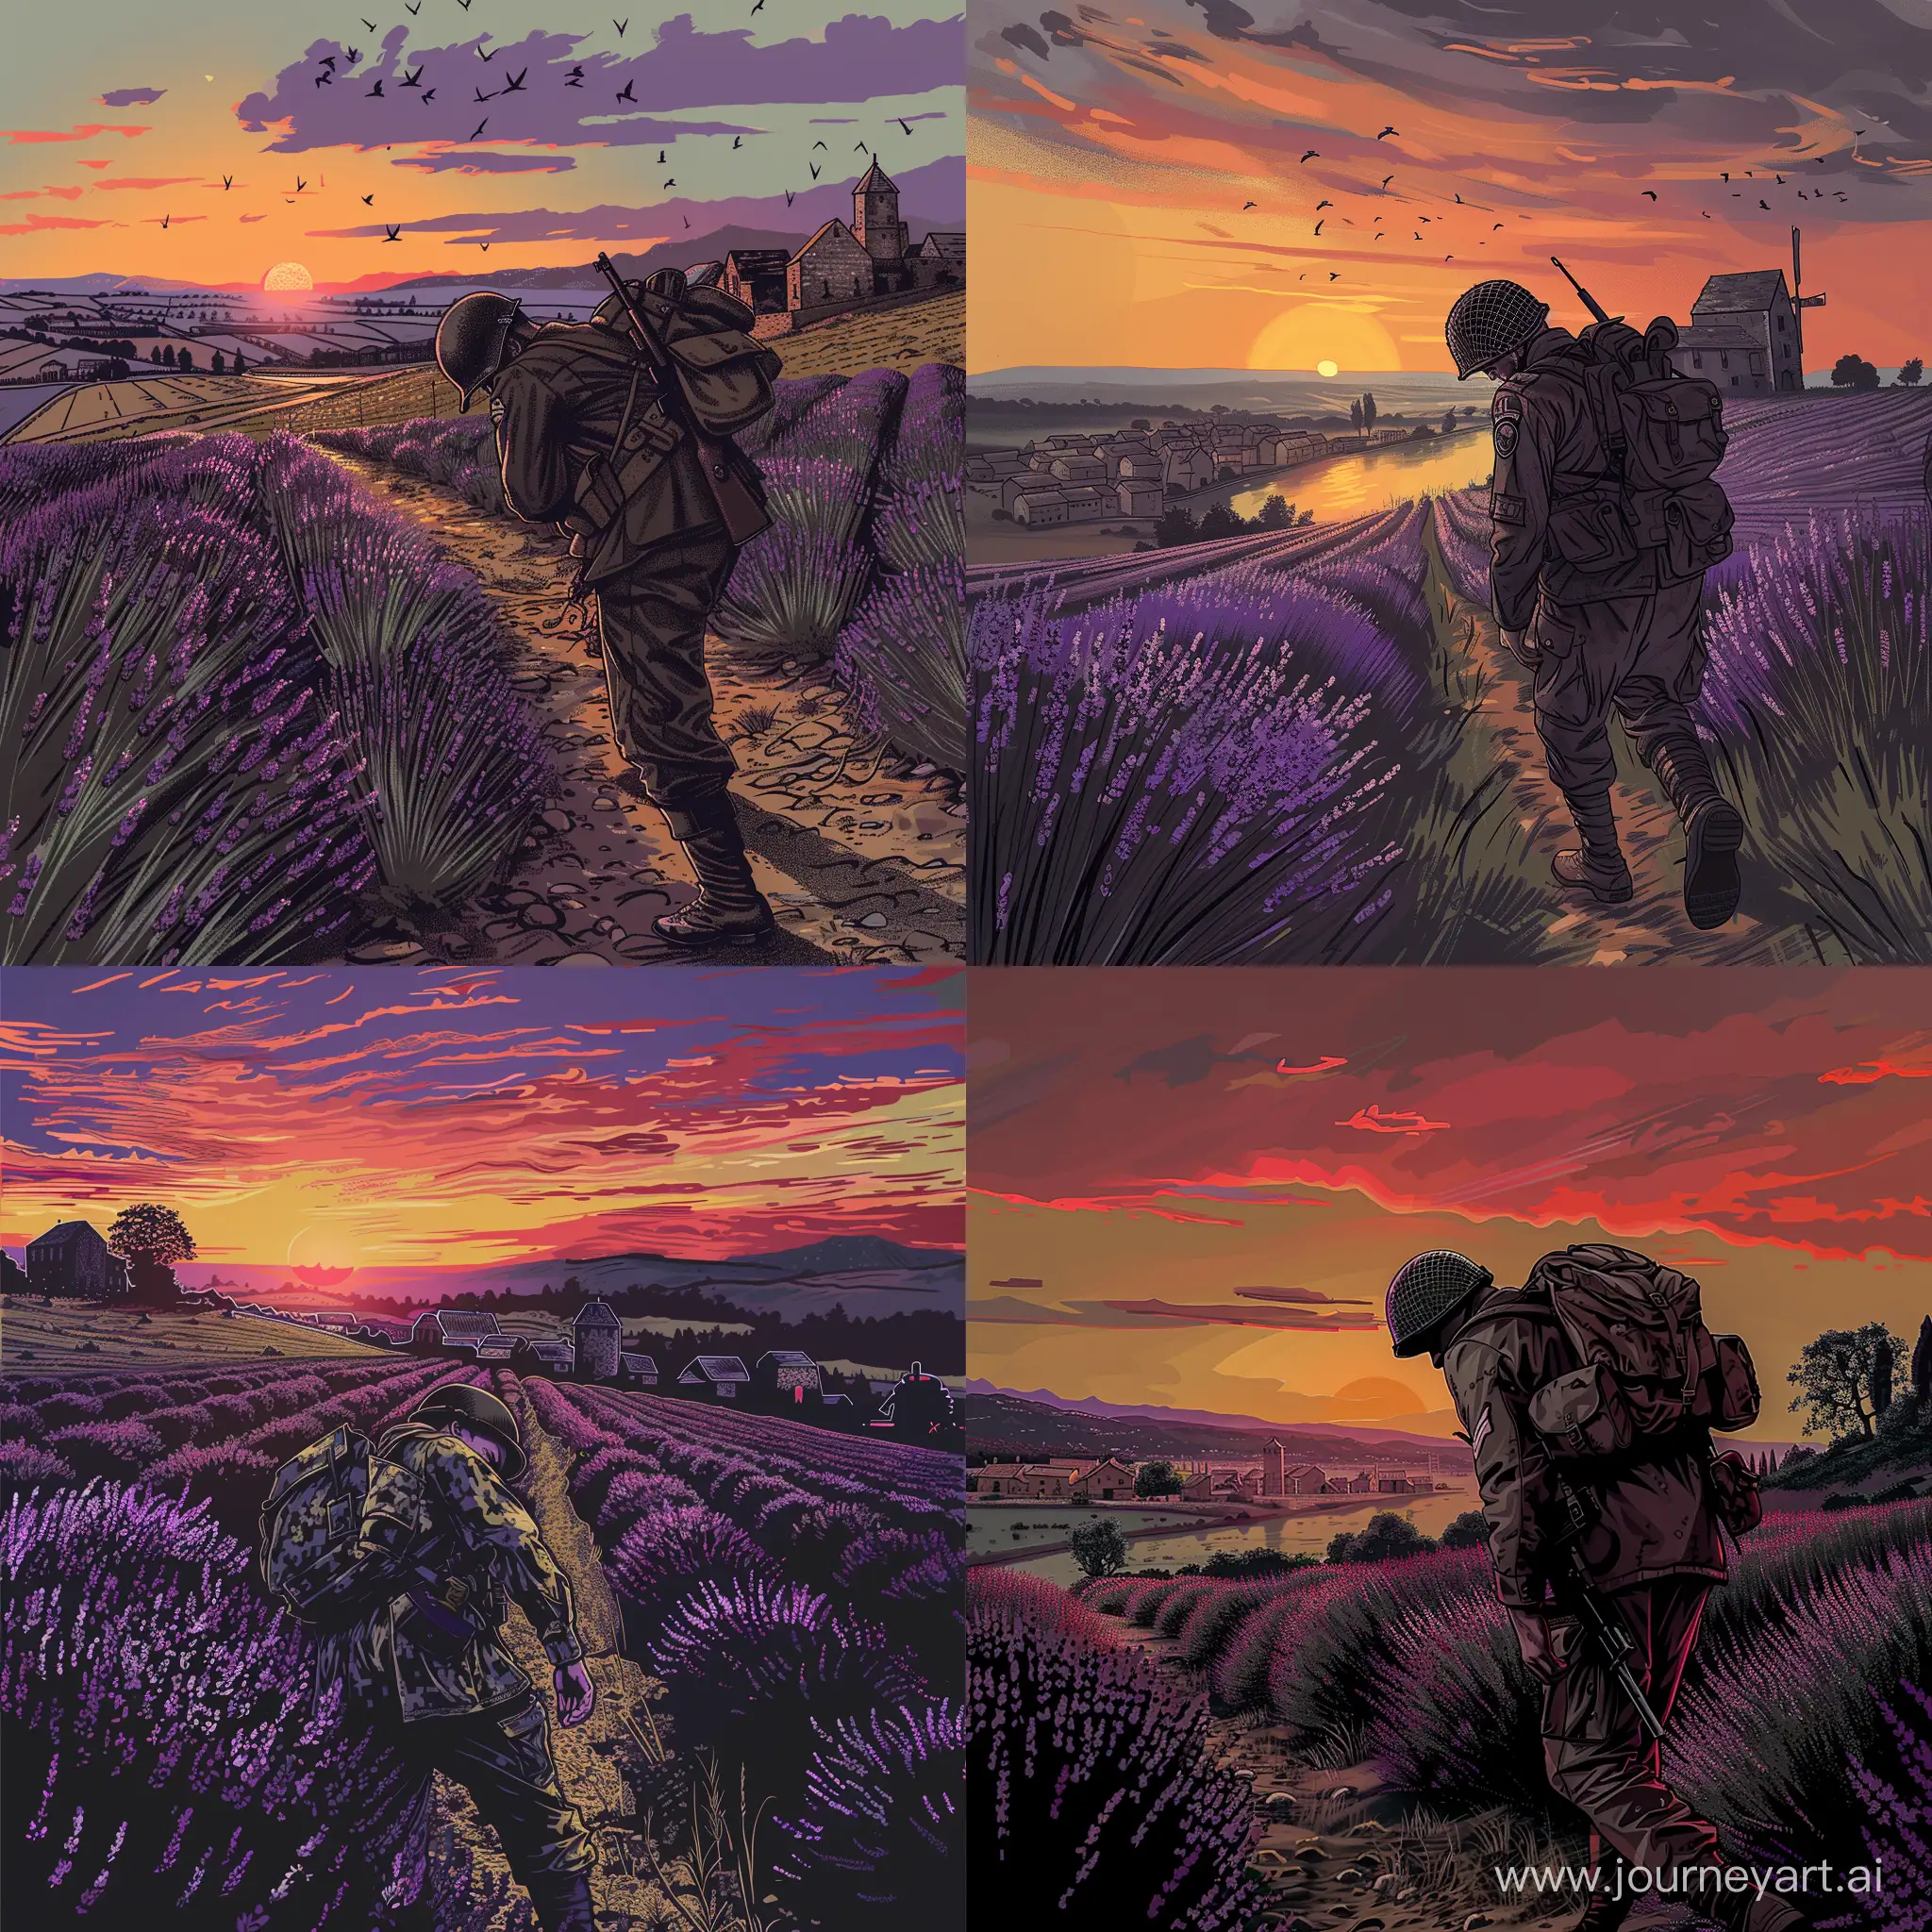 A soldier sadly lowering his head dressed in a uniform from the Second World War from the game Battlefield 5 is walking along a lavender field, and to his left is the old town of Provence, and to the right is a mill and barns far away, against the sunset in a digital doodle style drawn by human